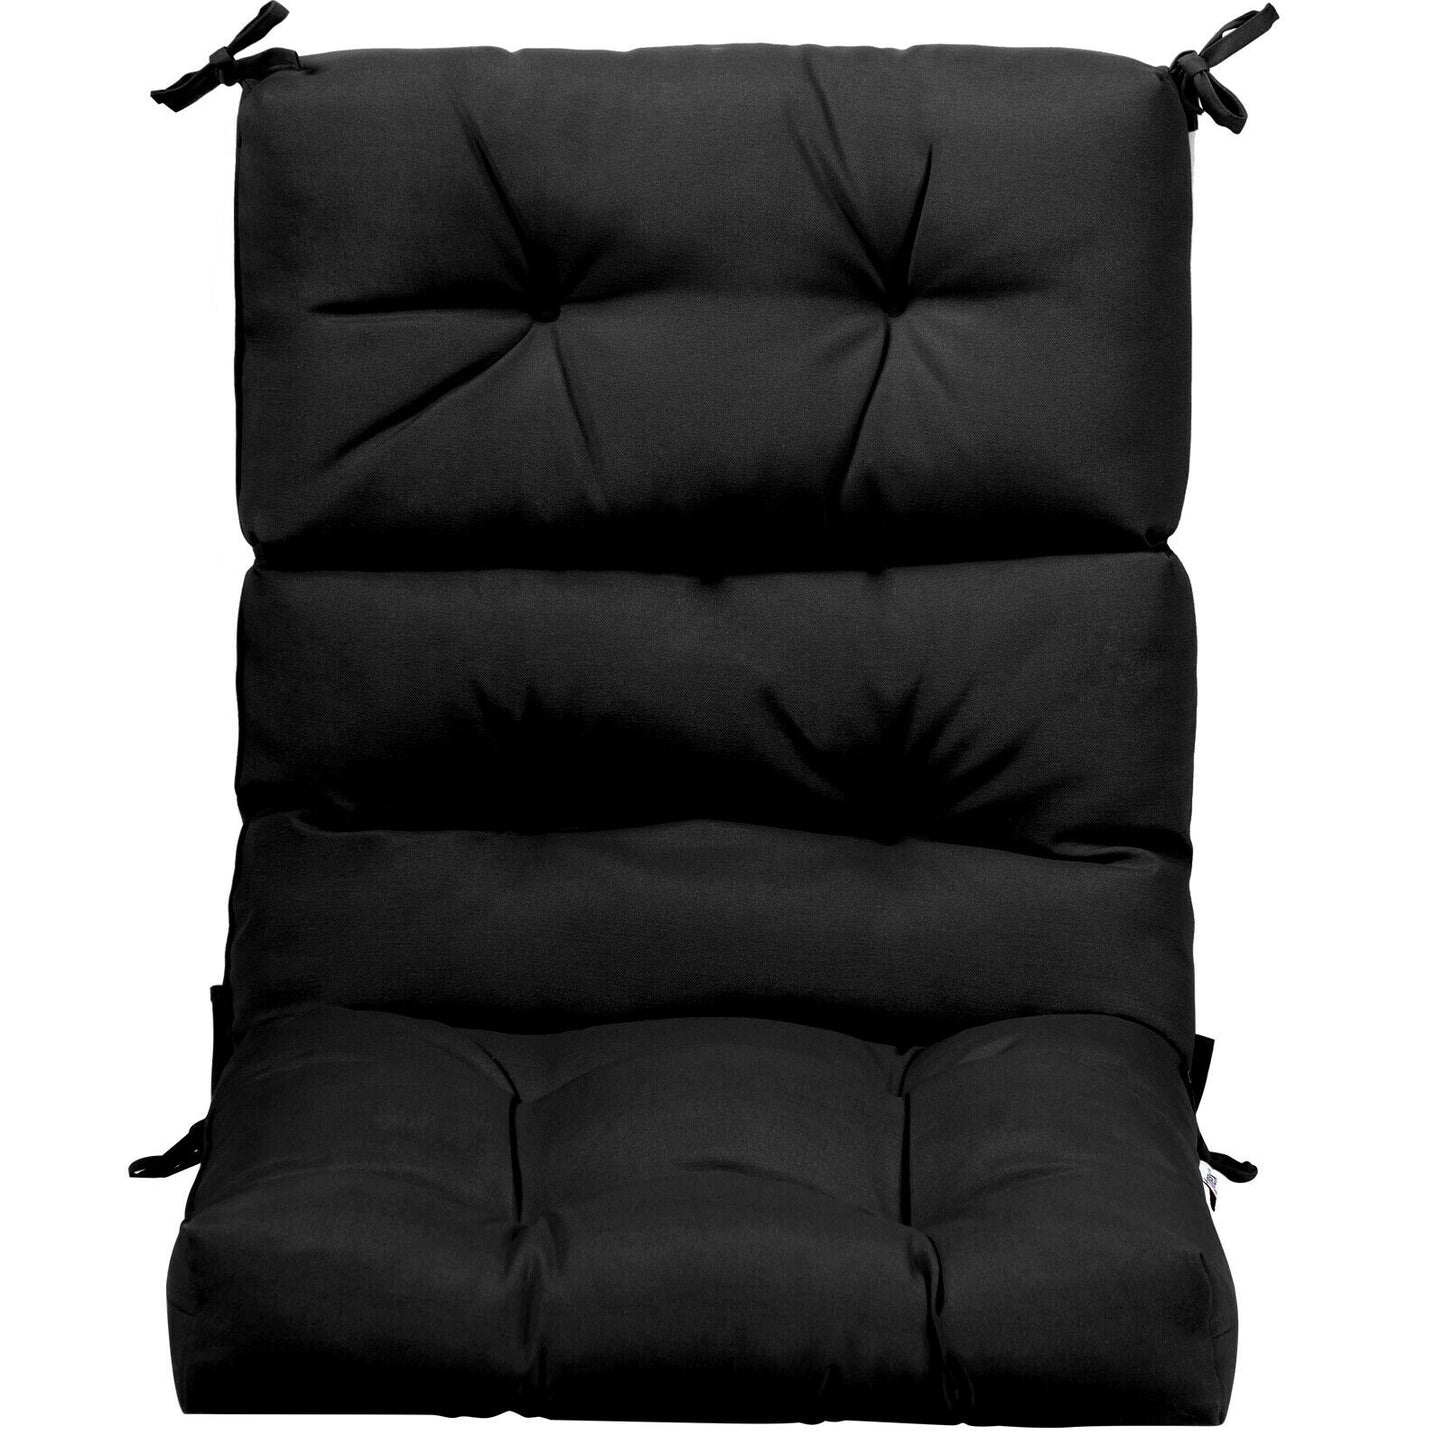 22 x 44 Inch Tufted Outdoor Patio Chair Seating Pad-Black